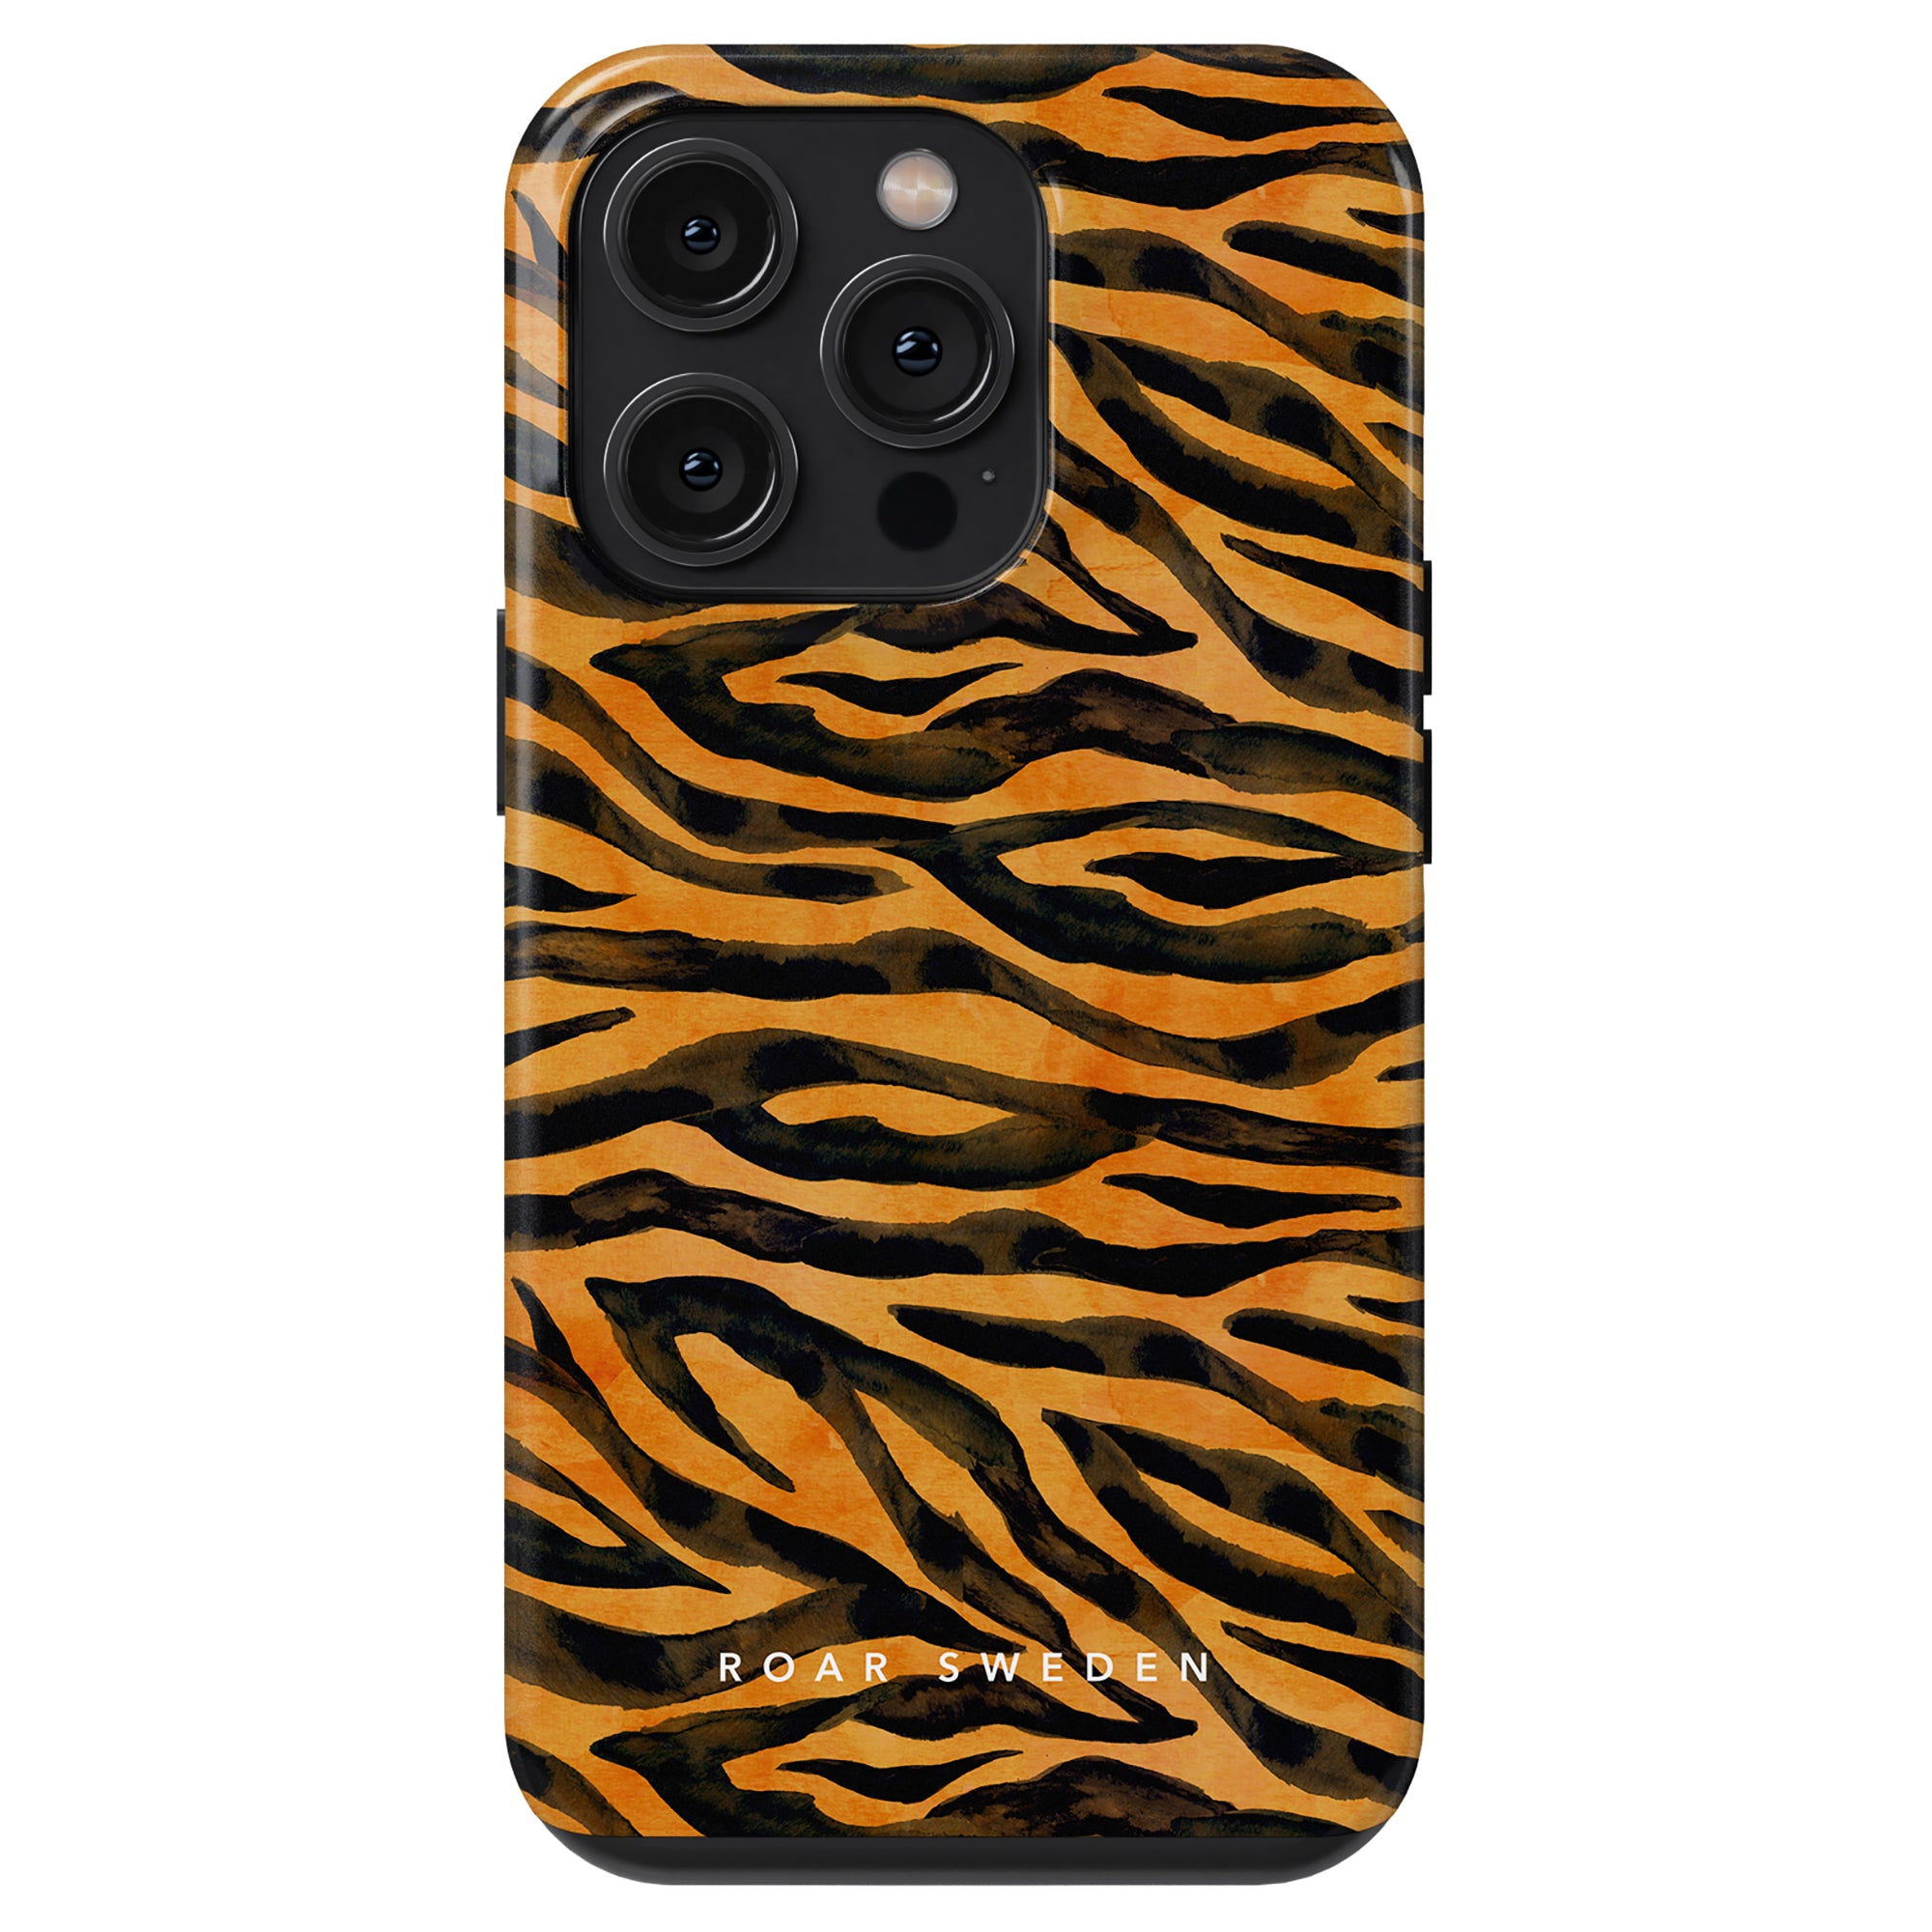 Roar - Tough Case with tiger stripe pattern and camera cutouts.